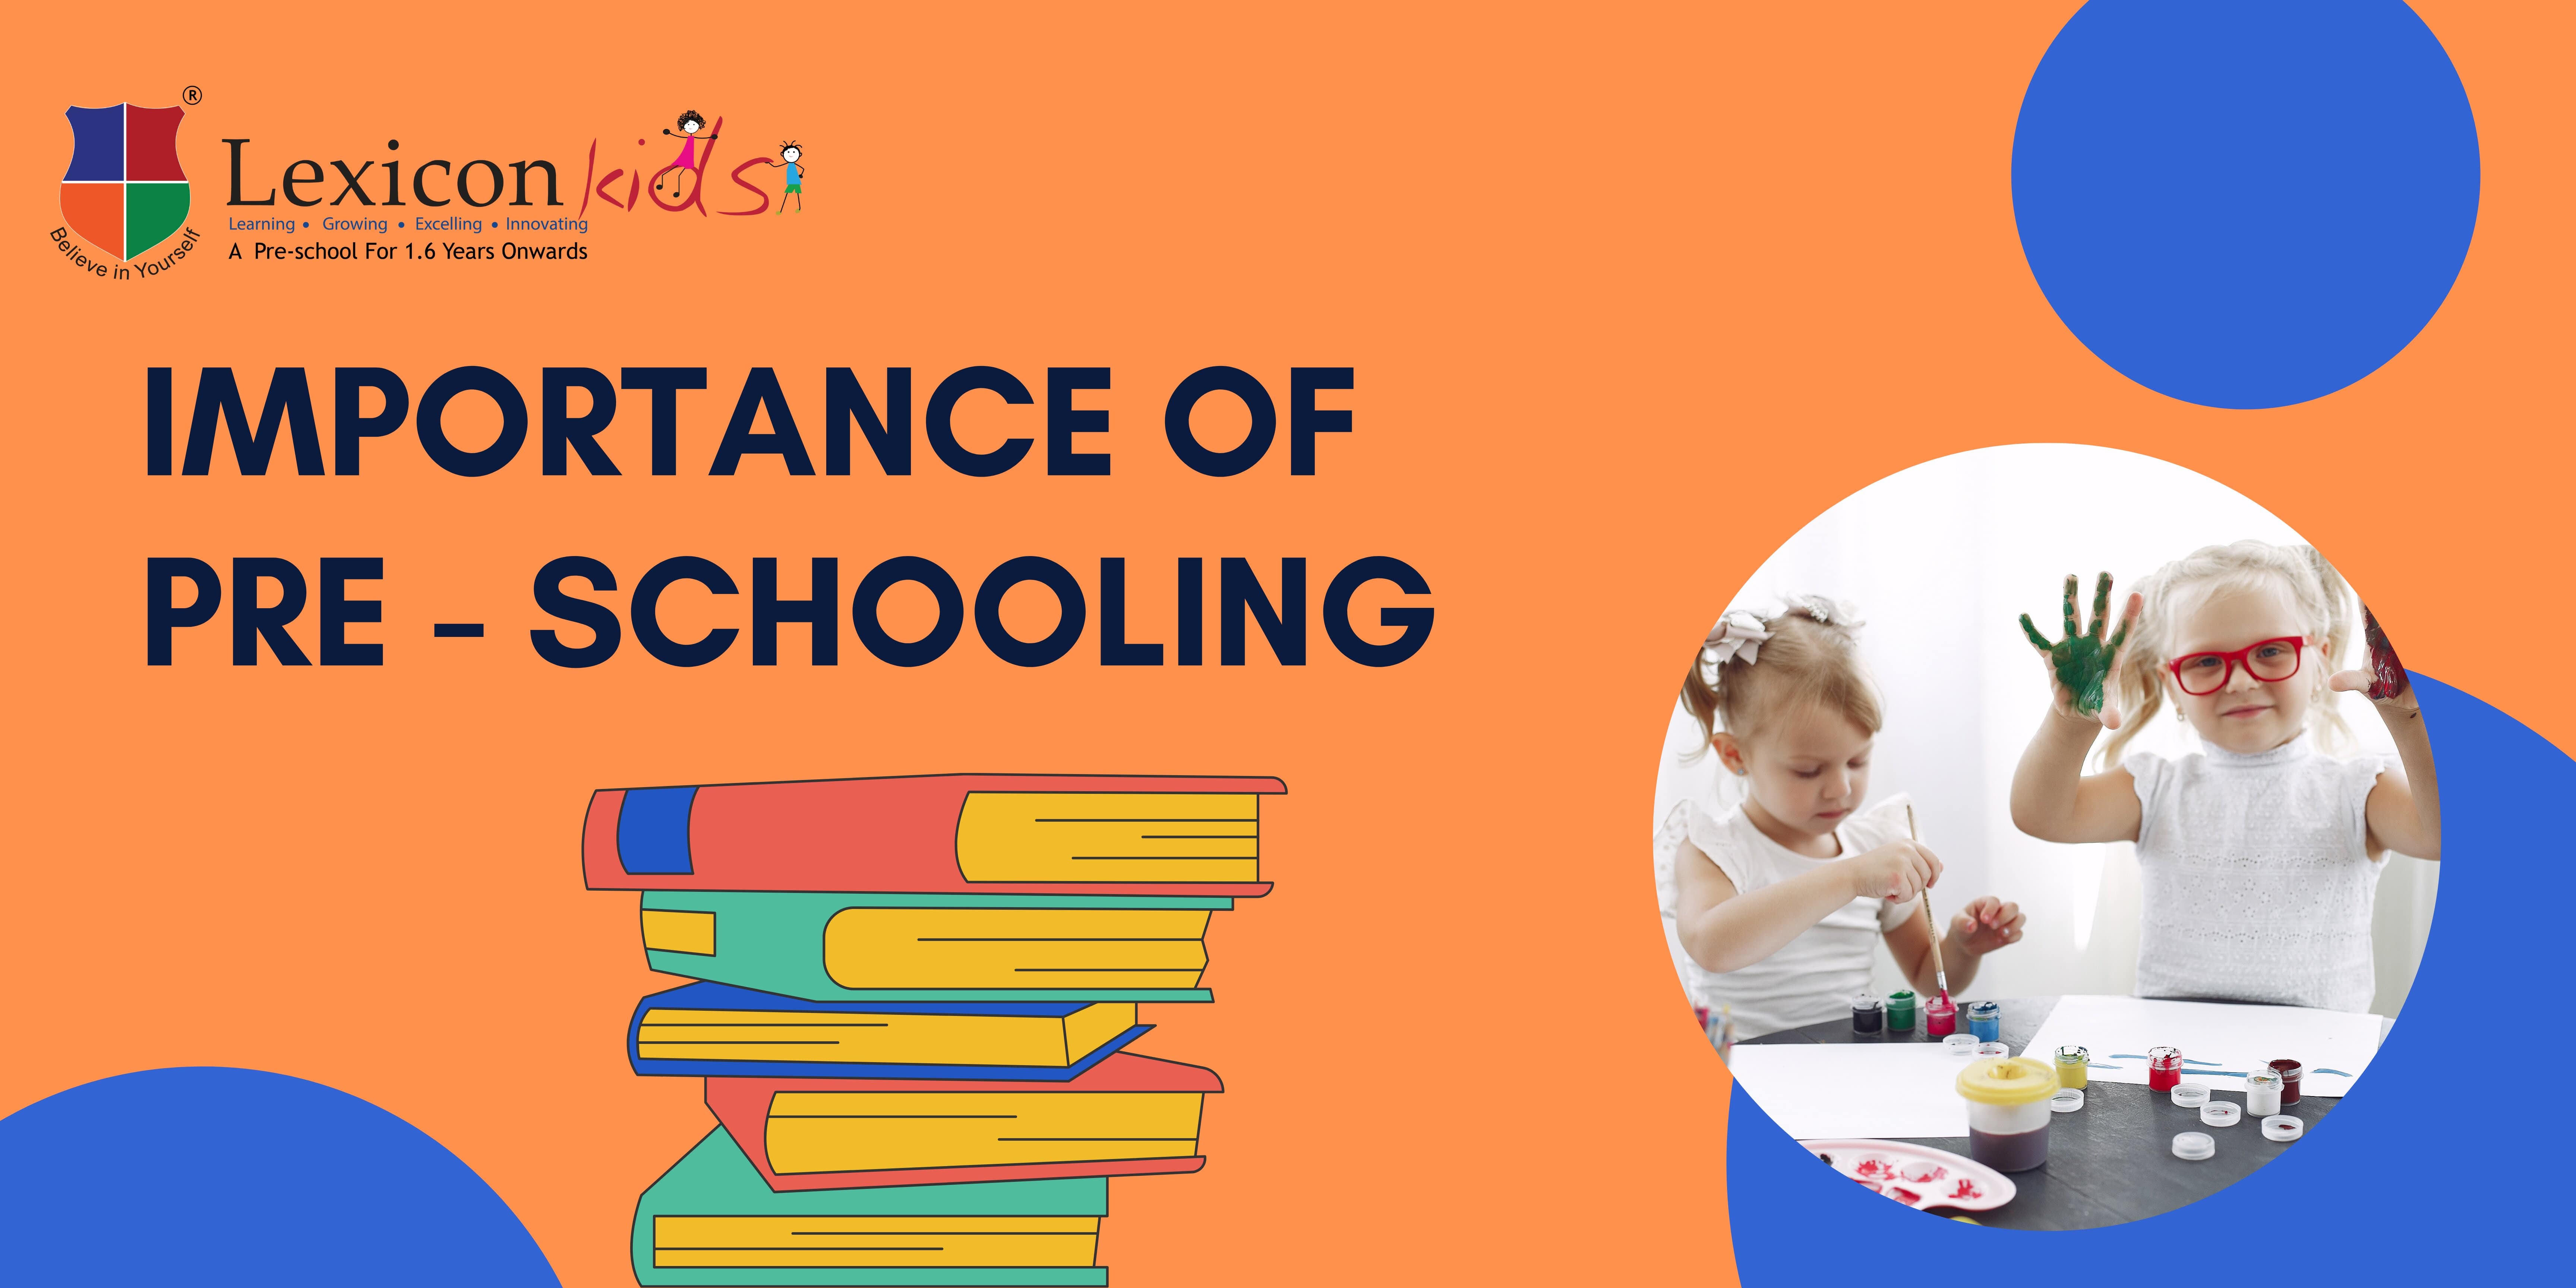 Importance of Pre- schooling